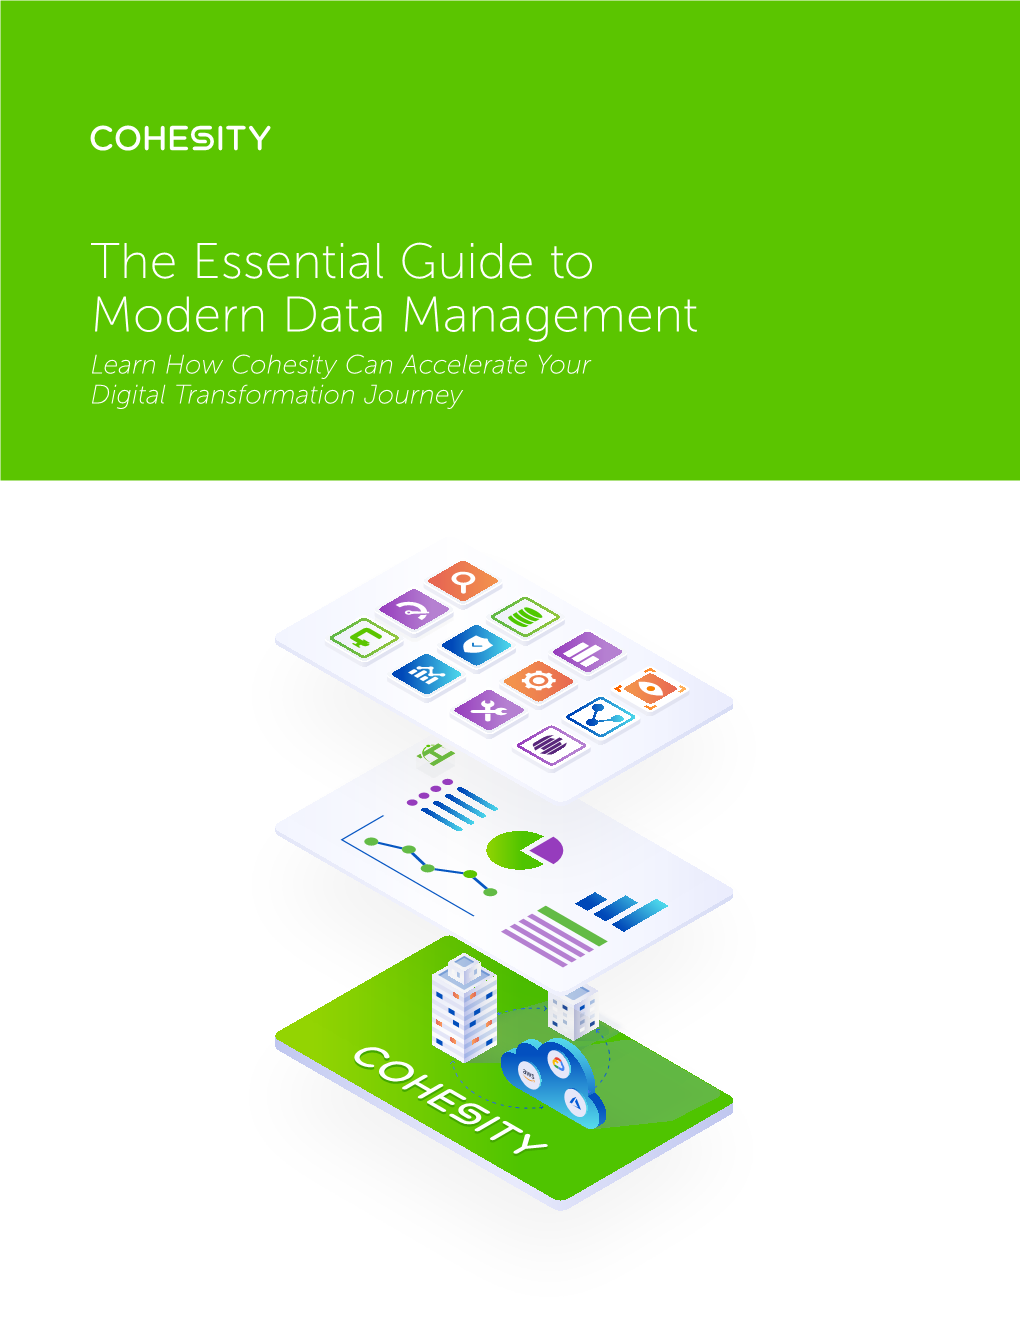 The Essential Guide to Modern Data Management Learn How Cohesity Can Accelerate Your Digital Transformation Journey the Essential Guide to Modern Data Management